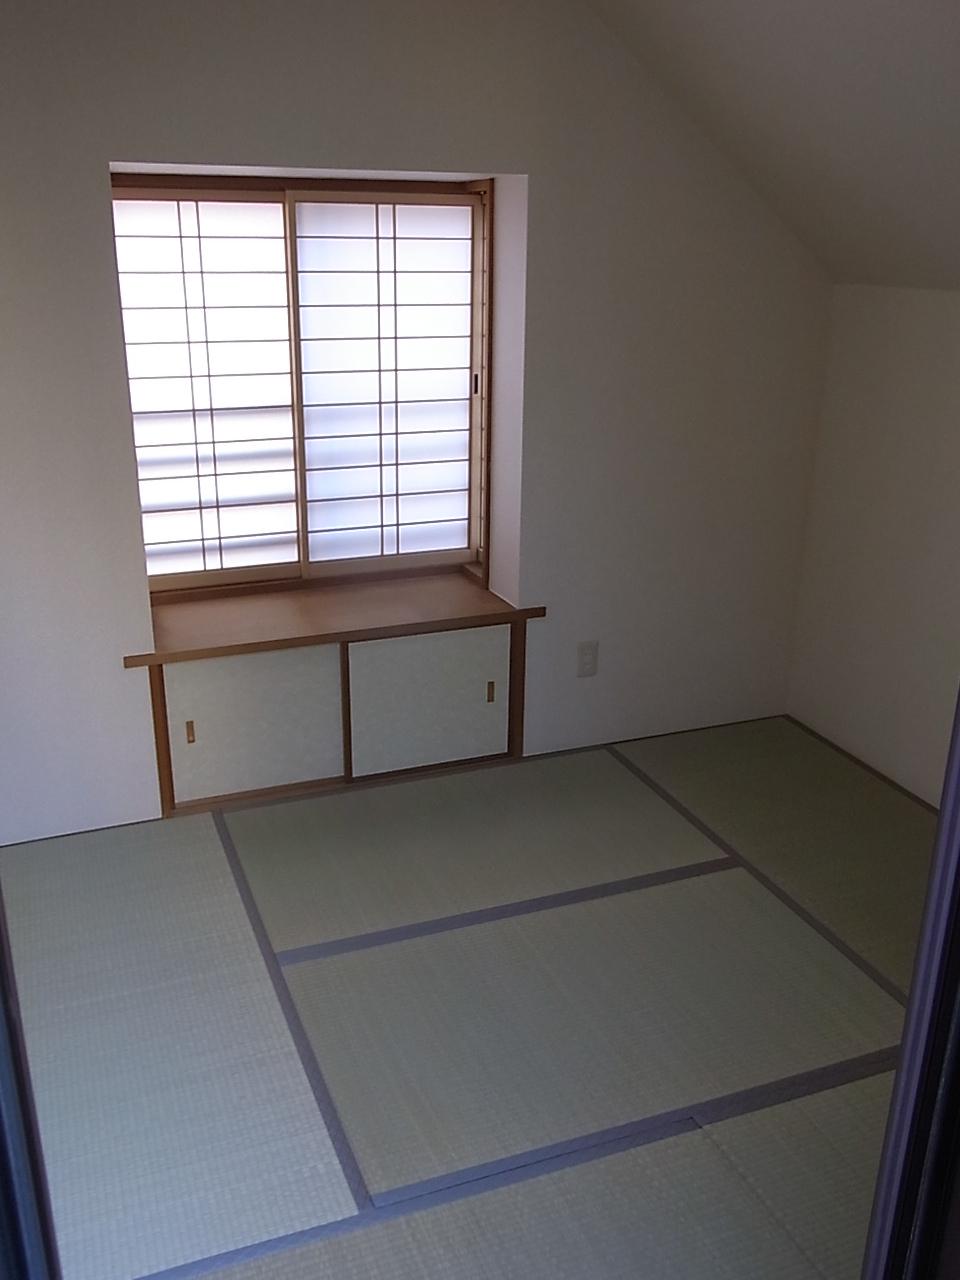 Other introspection. About 5.2 Pledge of Japanese-style room